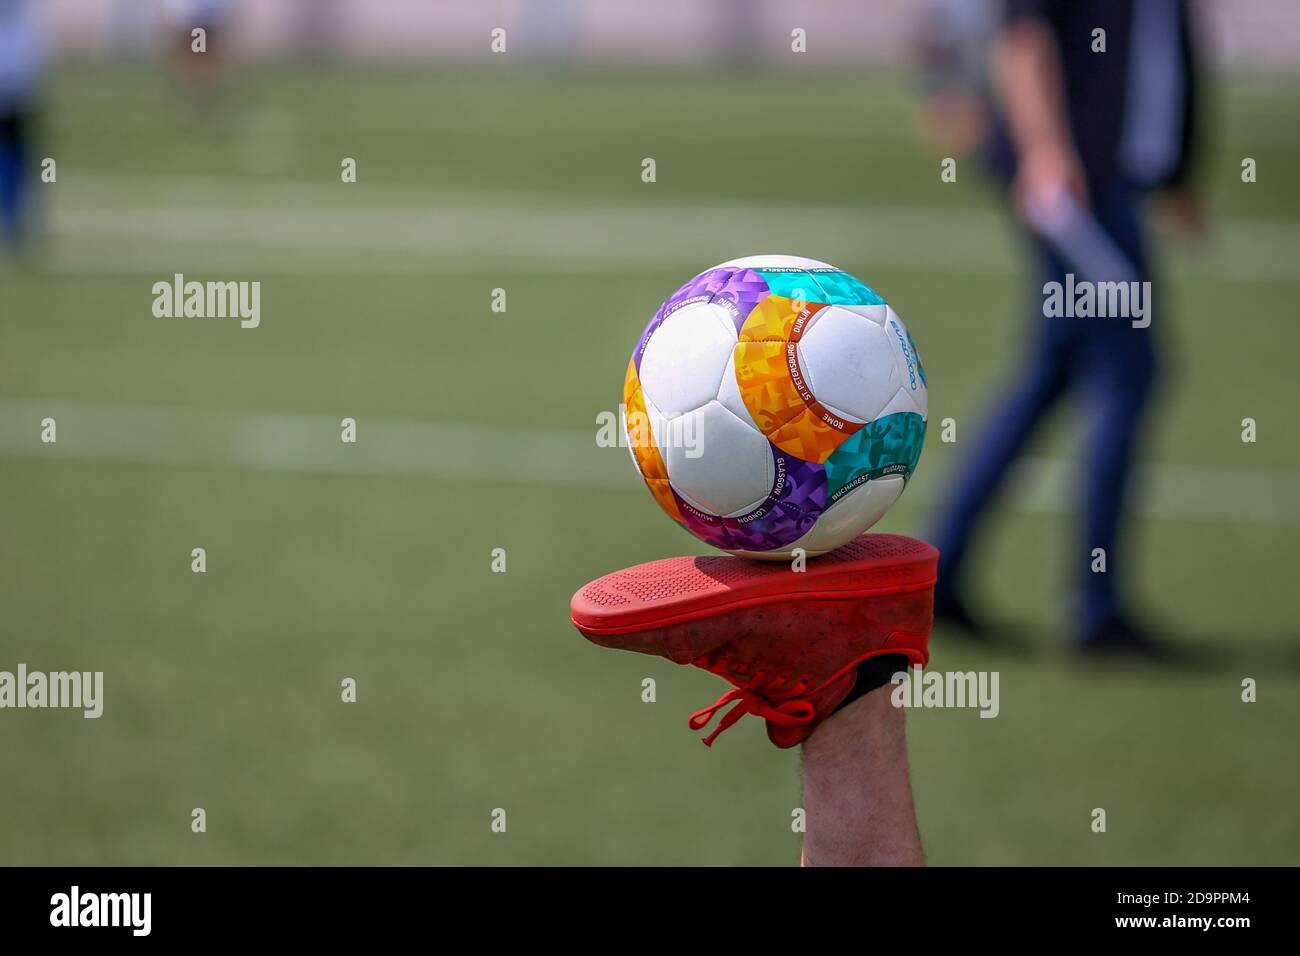 Bucharest, Romania - May 24, 2019: Details with a soccer player's foot with  the Adidas Conext 19 European qualifiers official soccer match ball on Are  Stock Photo - Alamy